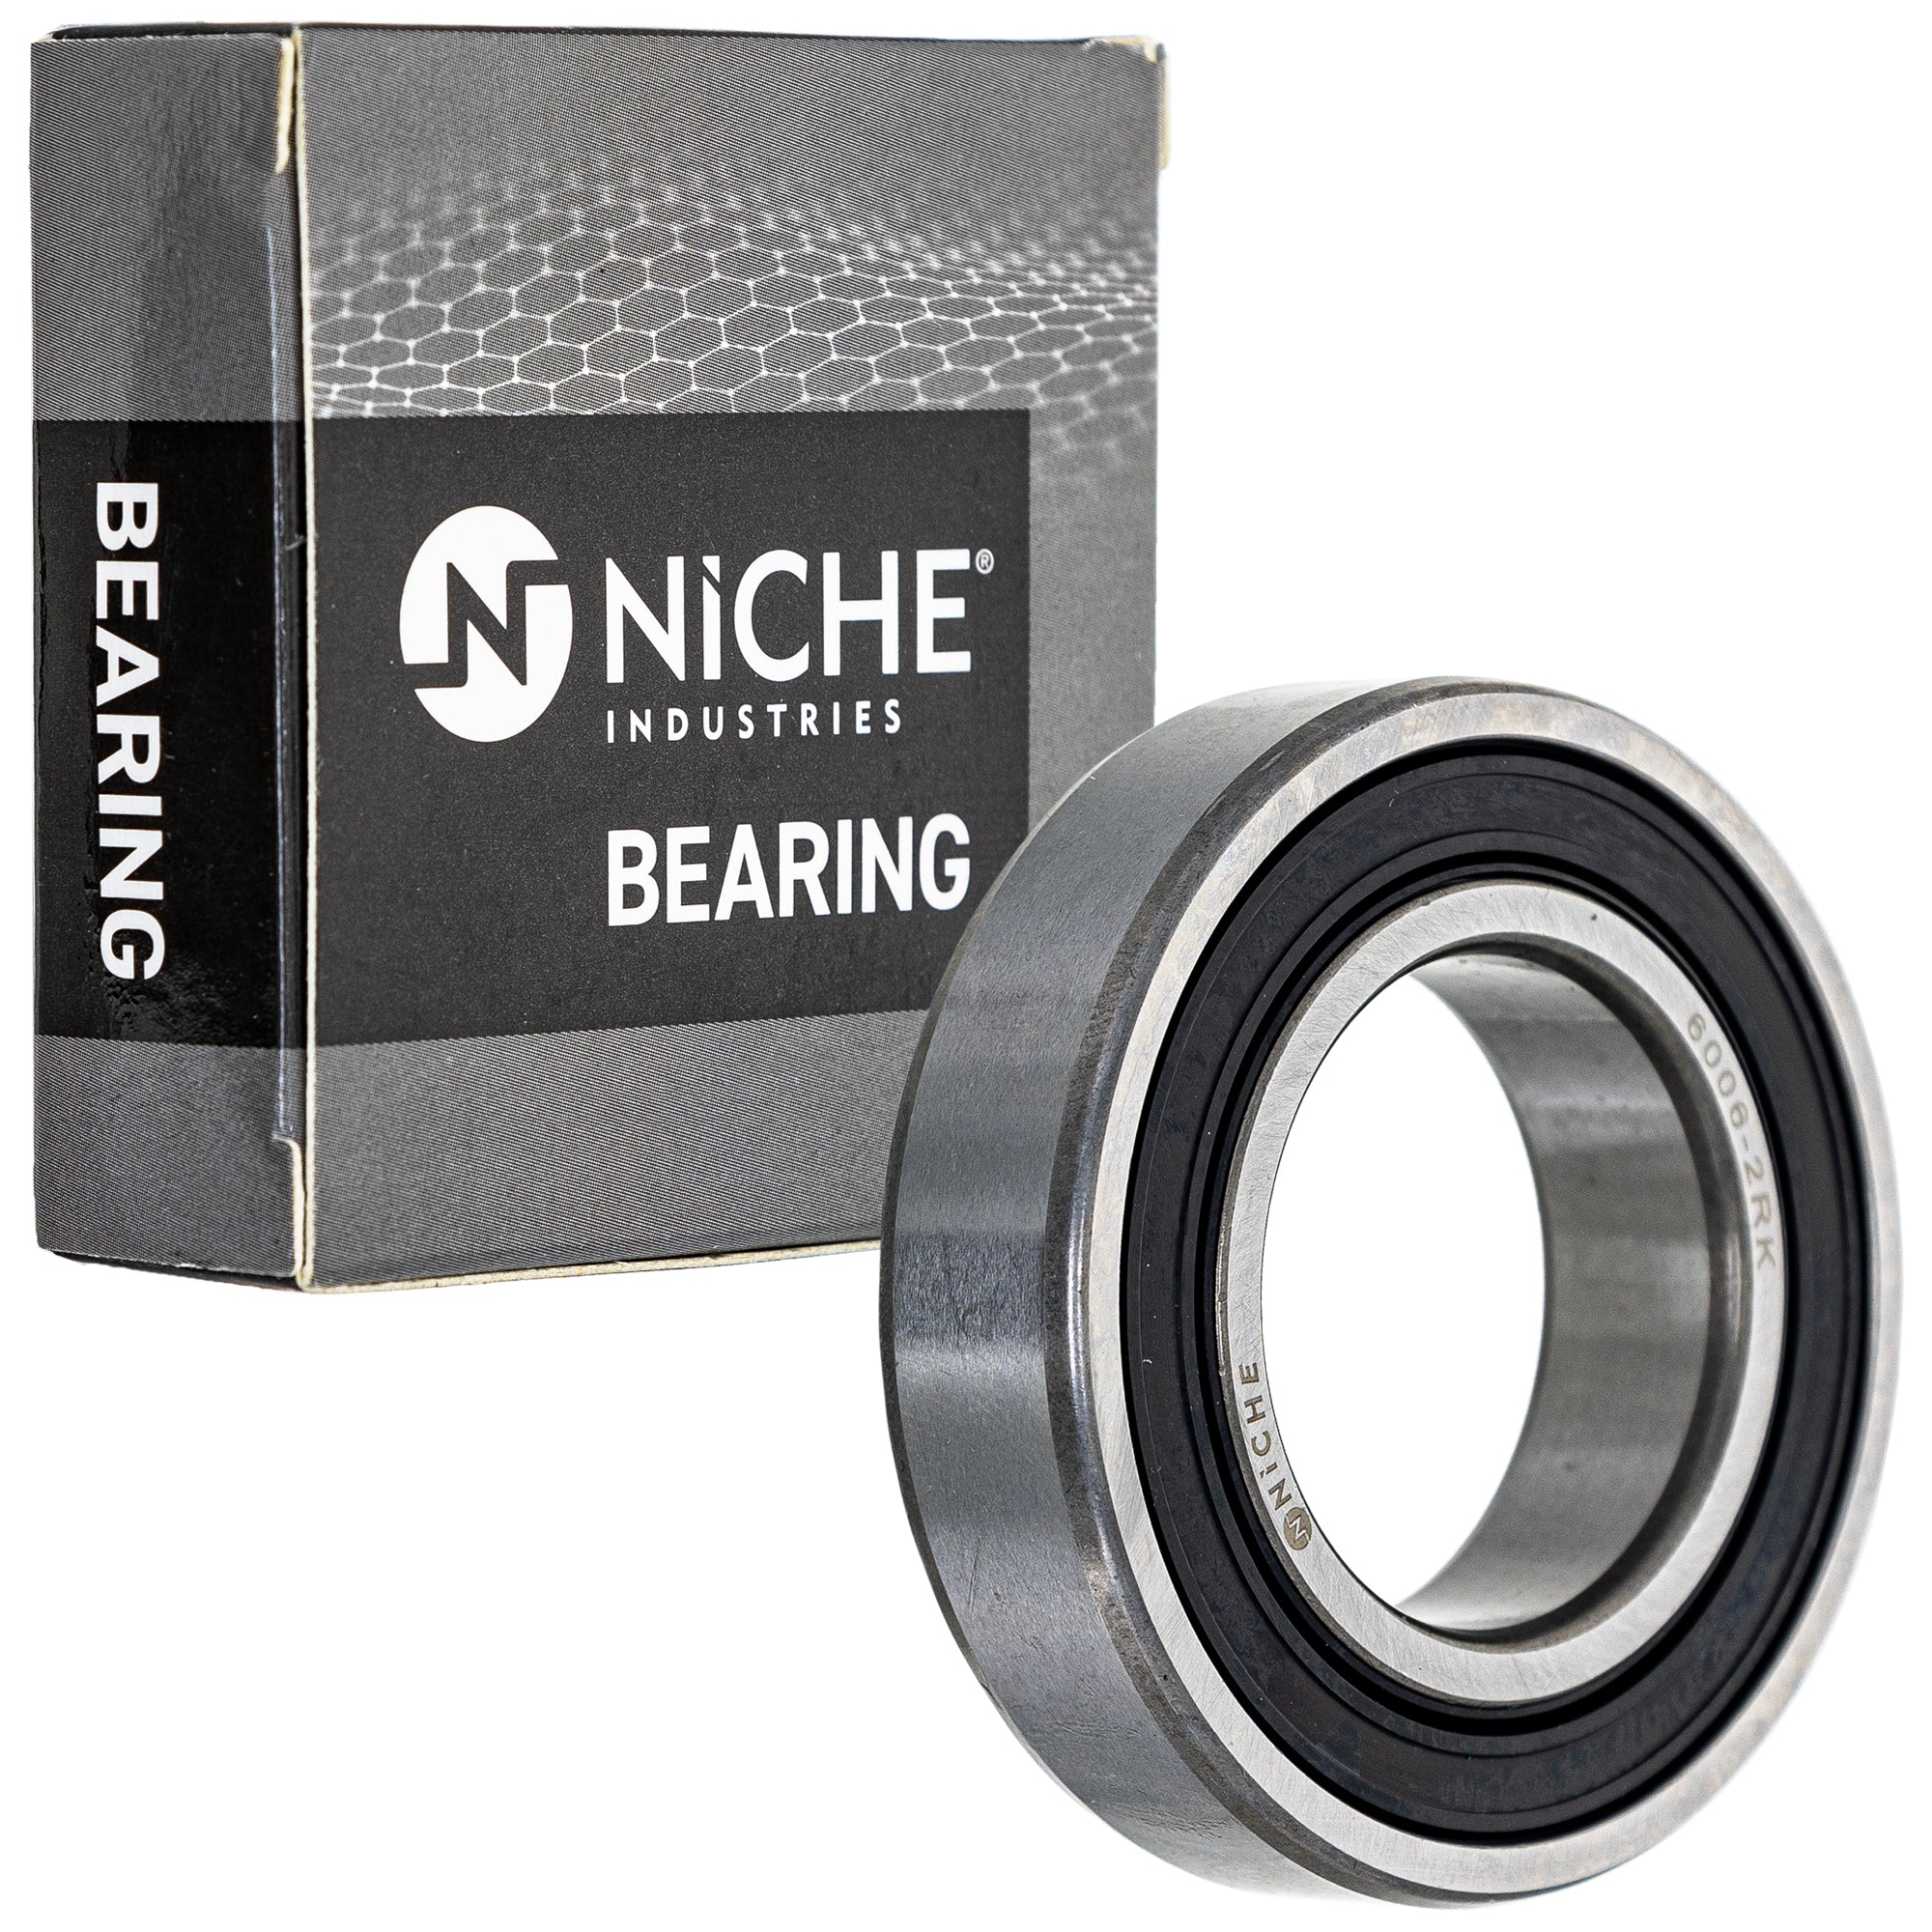 NICHE 519-CBB2218R Bearing & Seal Kit 2-Pack for zOTHER Arctic Cat